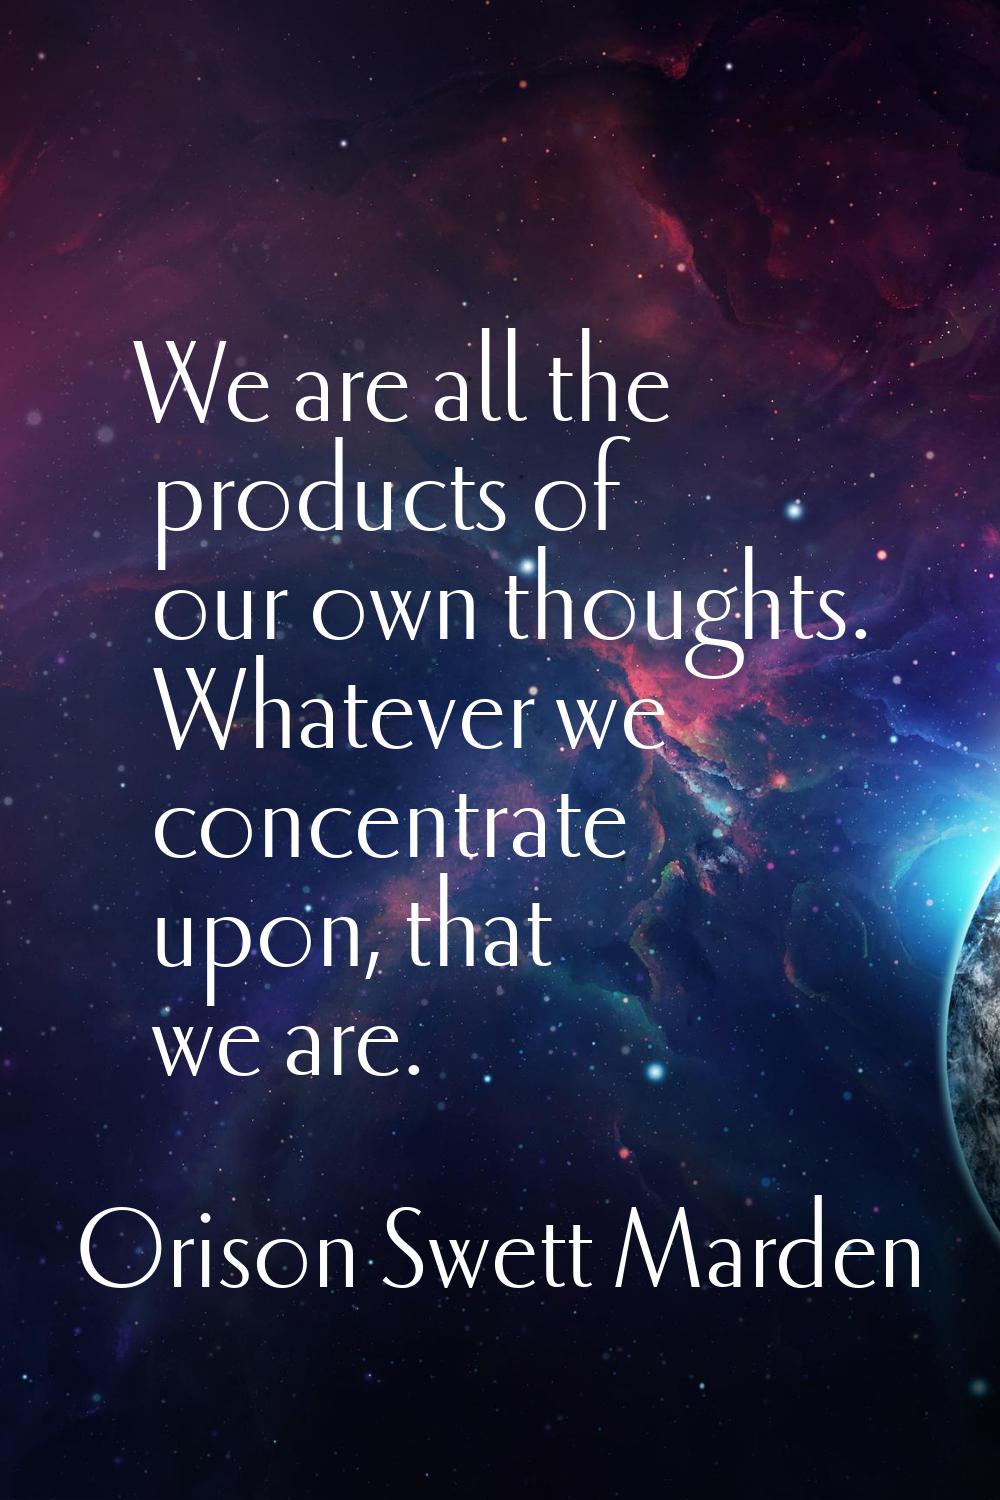 We are all the products of our own thoughts. Whatever we concentrate upon, that we are.